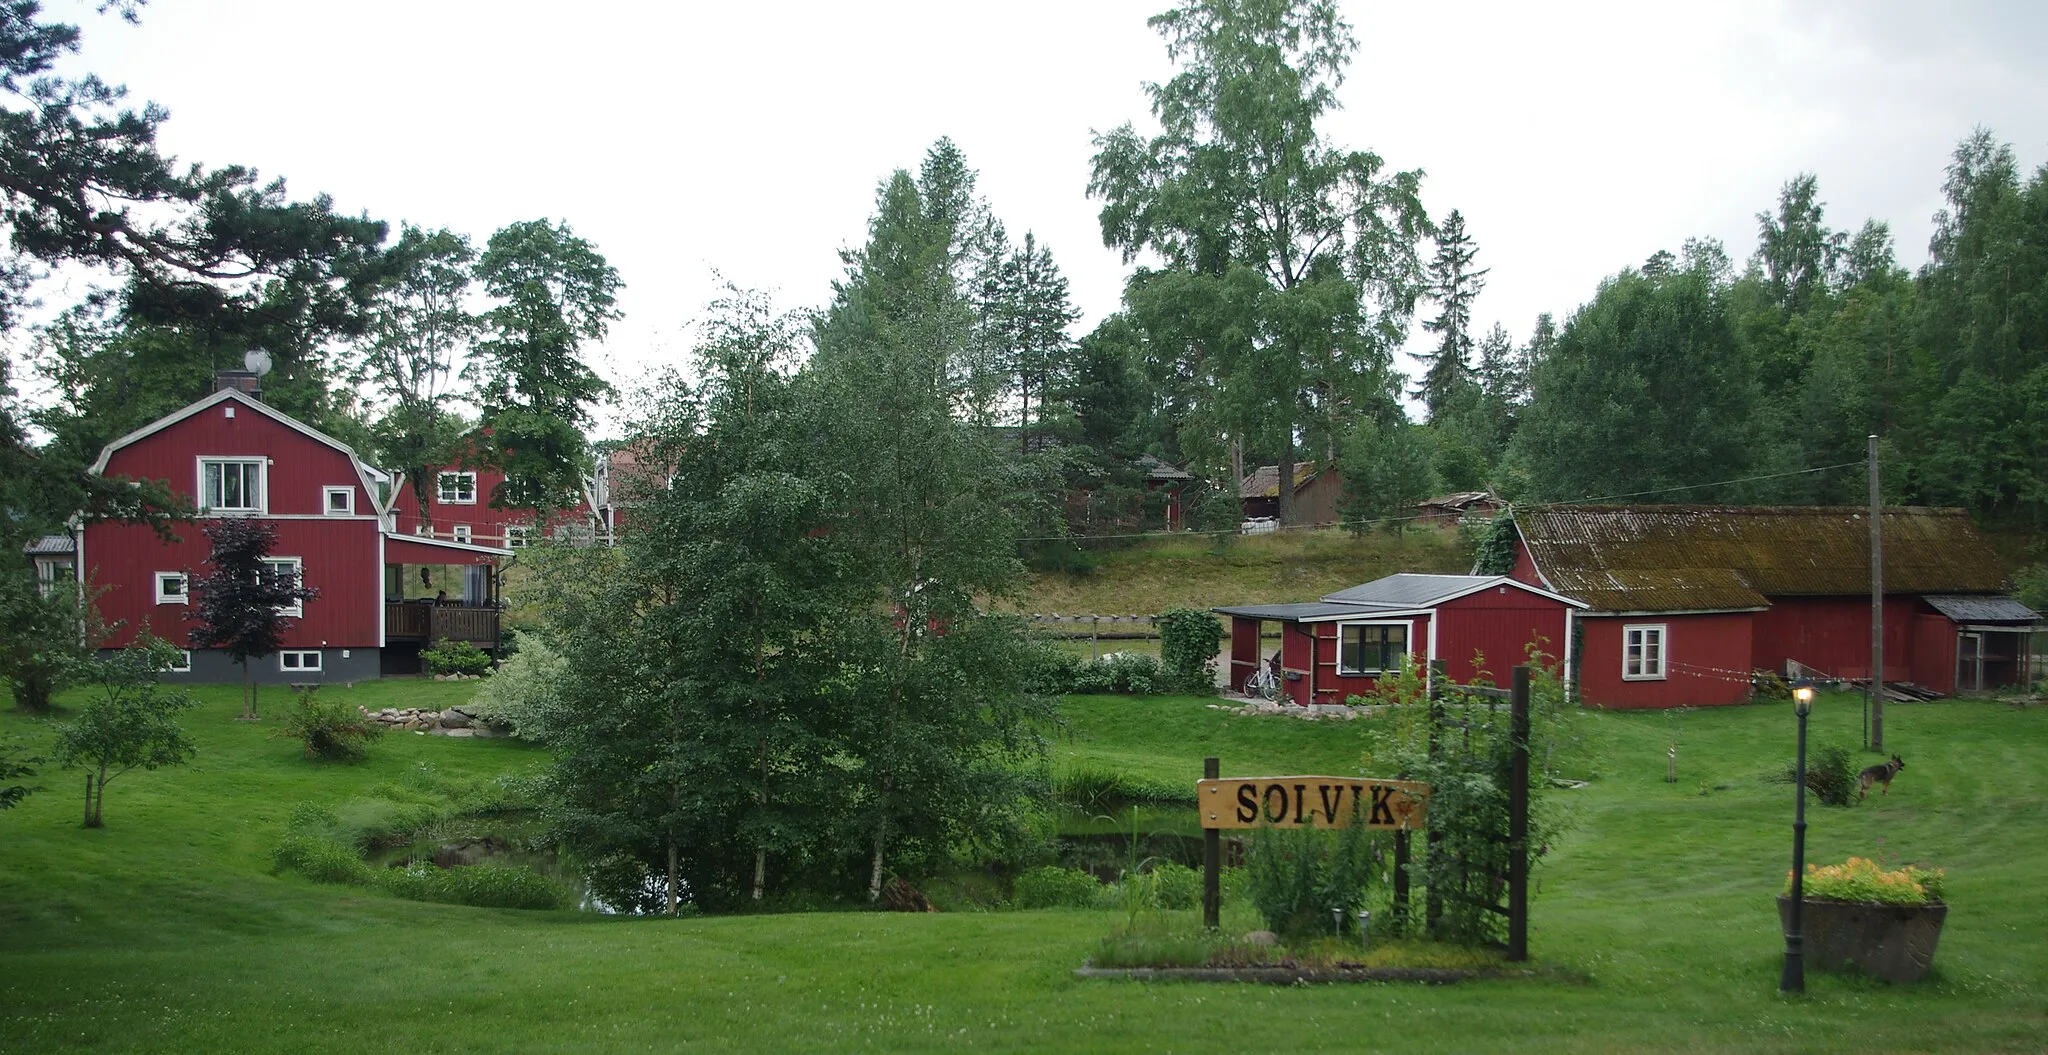 Photo showing: Velinga, a small village in Tidaholm municipality in Västergötland, Sweden.